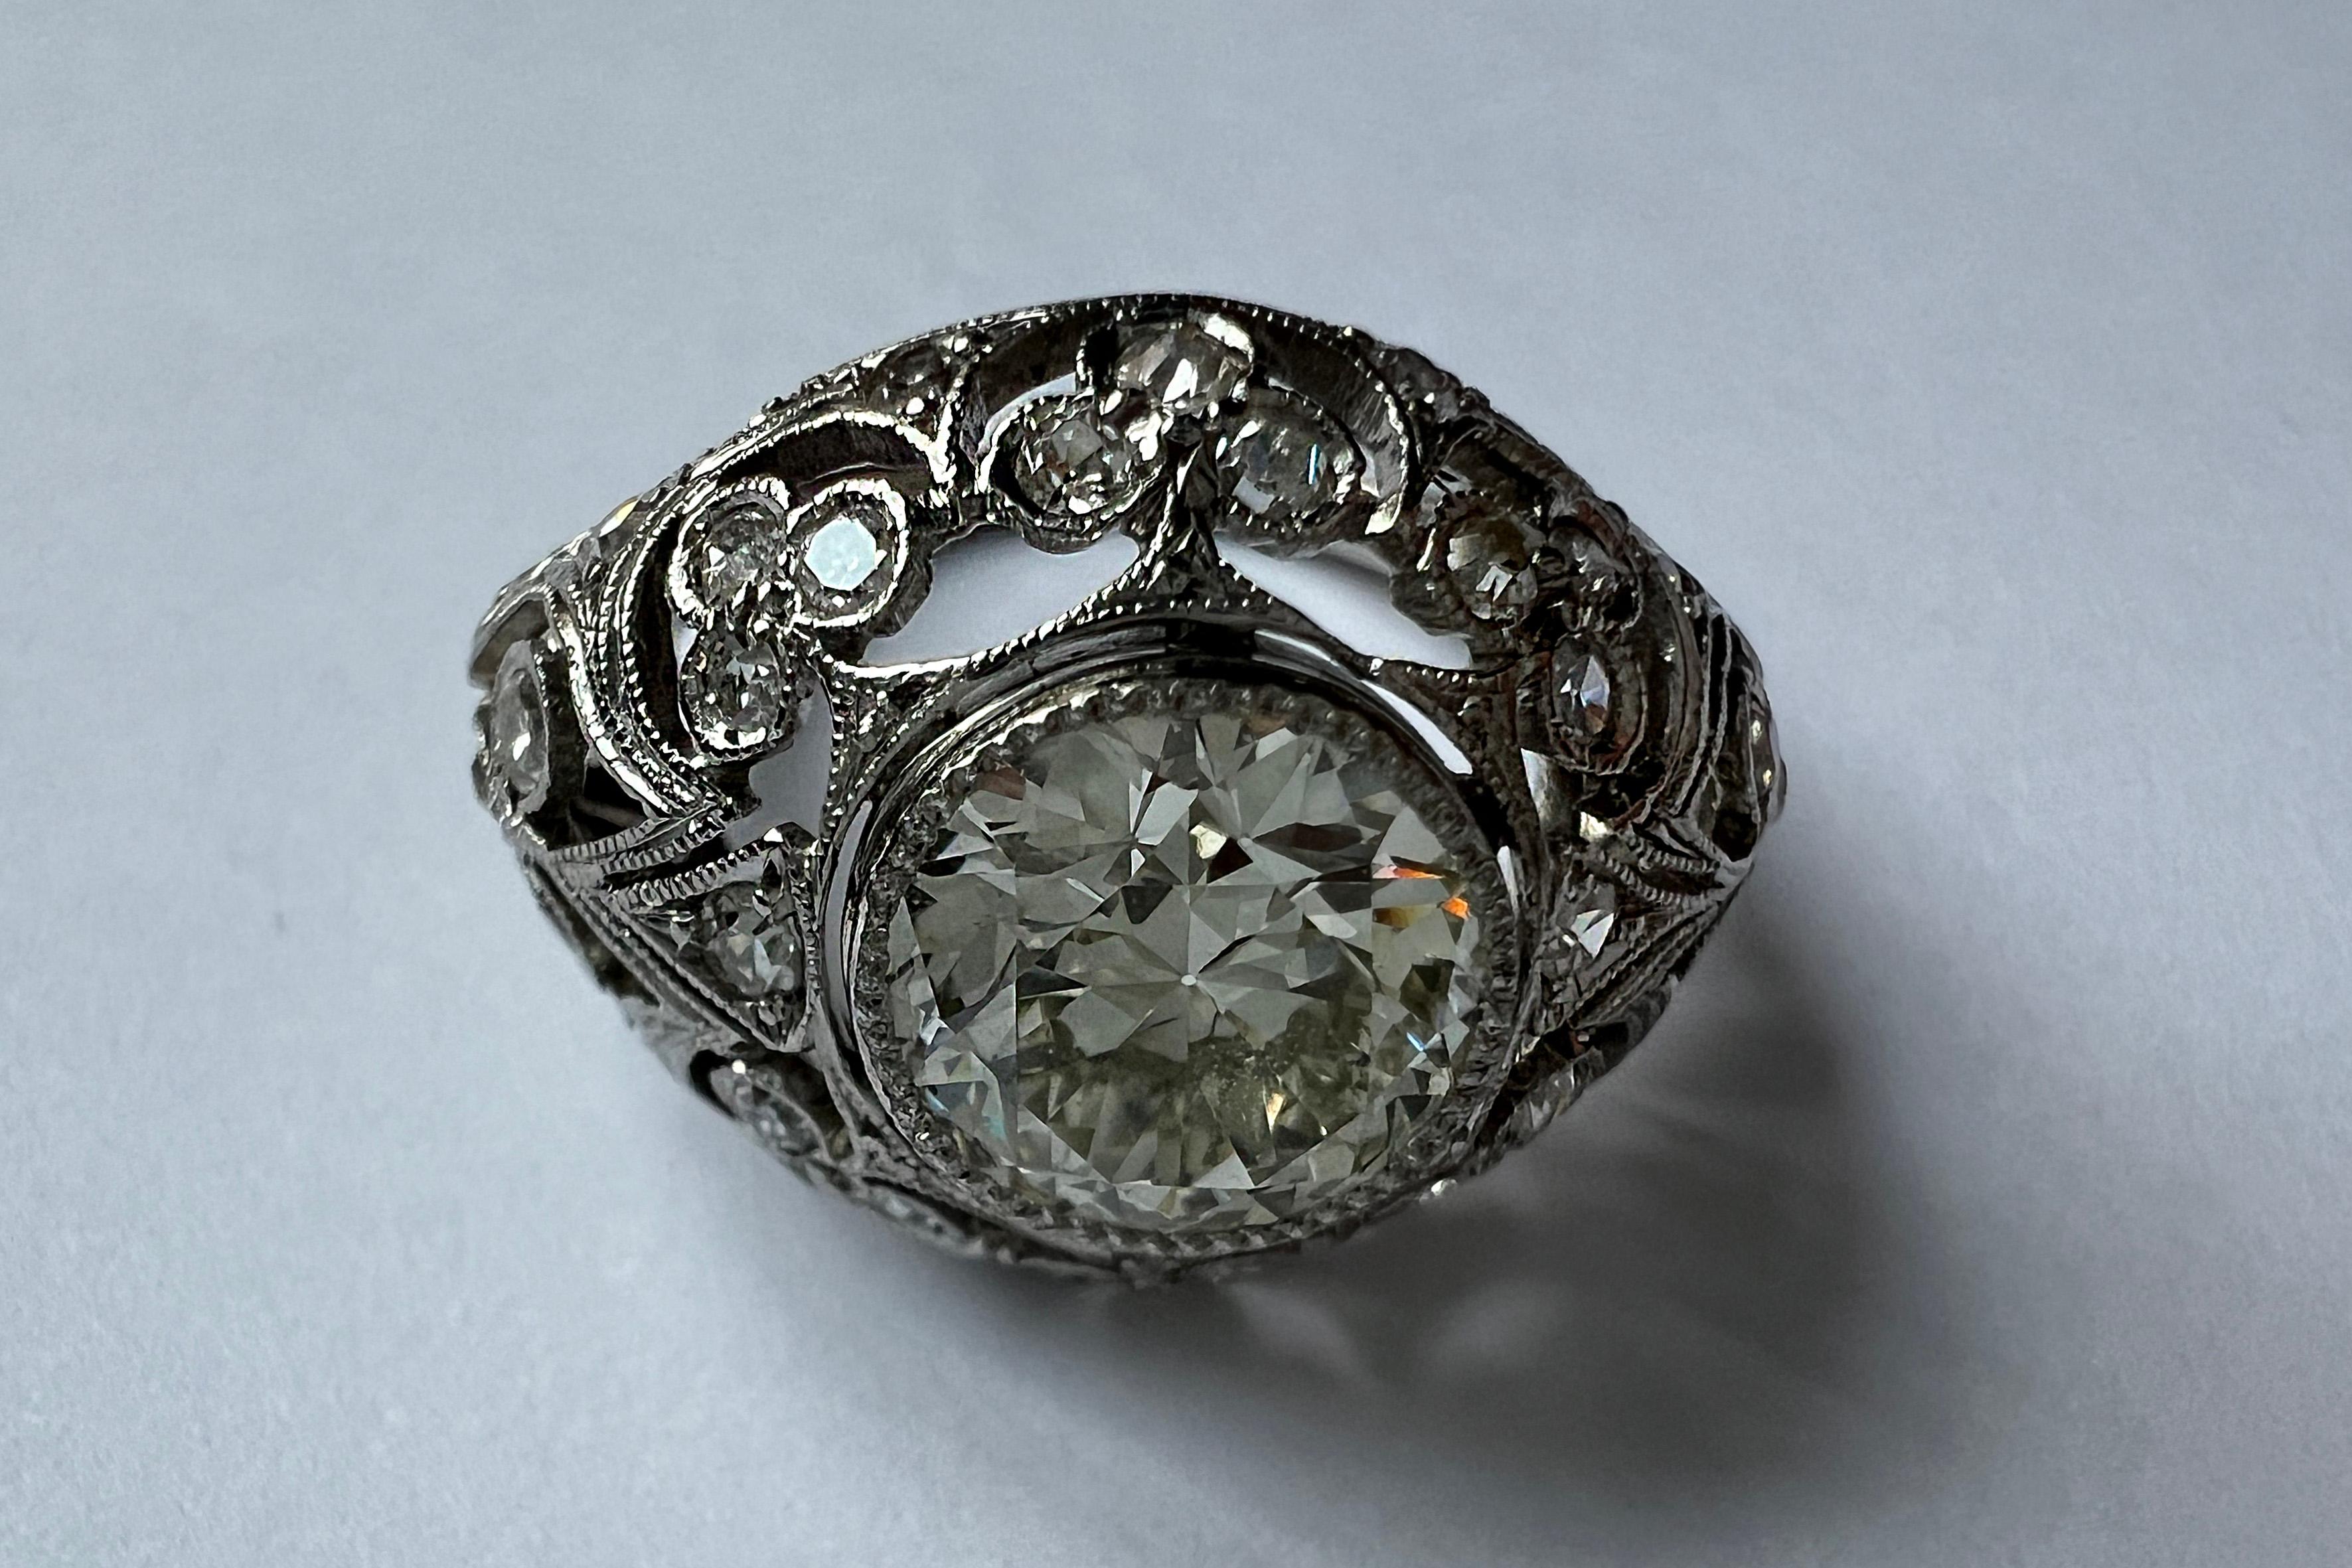 Art Deco Original Bombe' Platinum Dinner ring with diamonds, an exquisite testament to the glamour of a bygone era. Adorned with diamonds, the central old-cut round stone, boasting an approximate weight of 1.70 ct., takes center stage, surrounded by